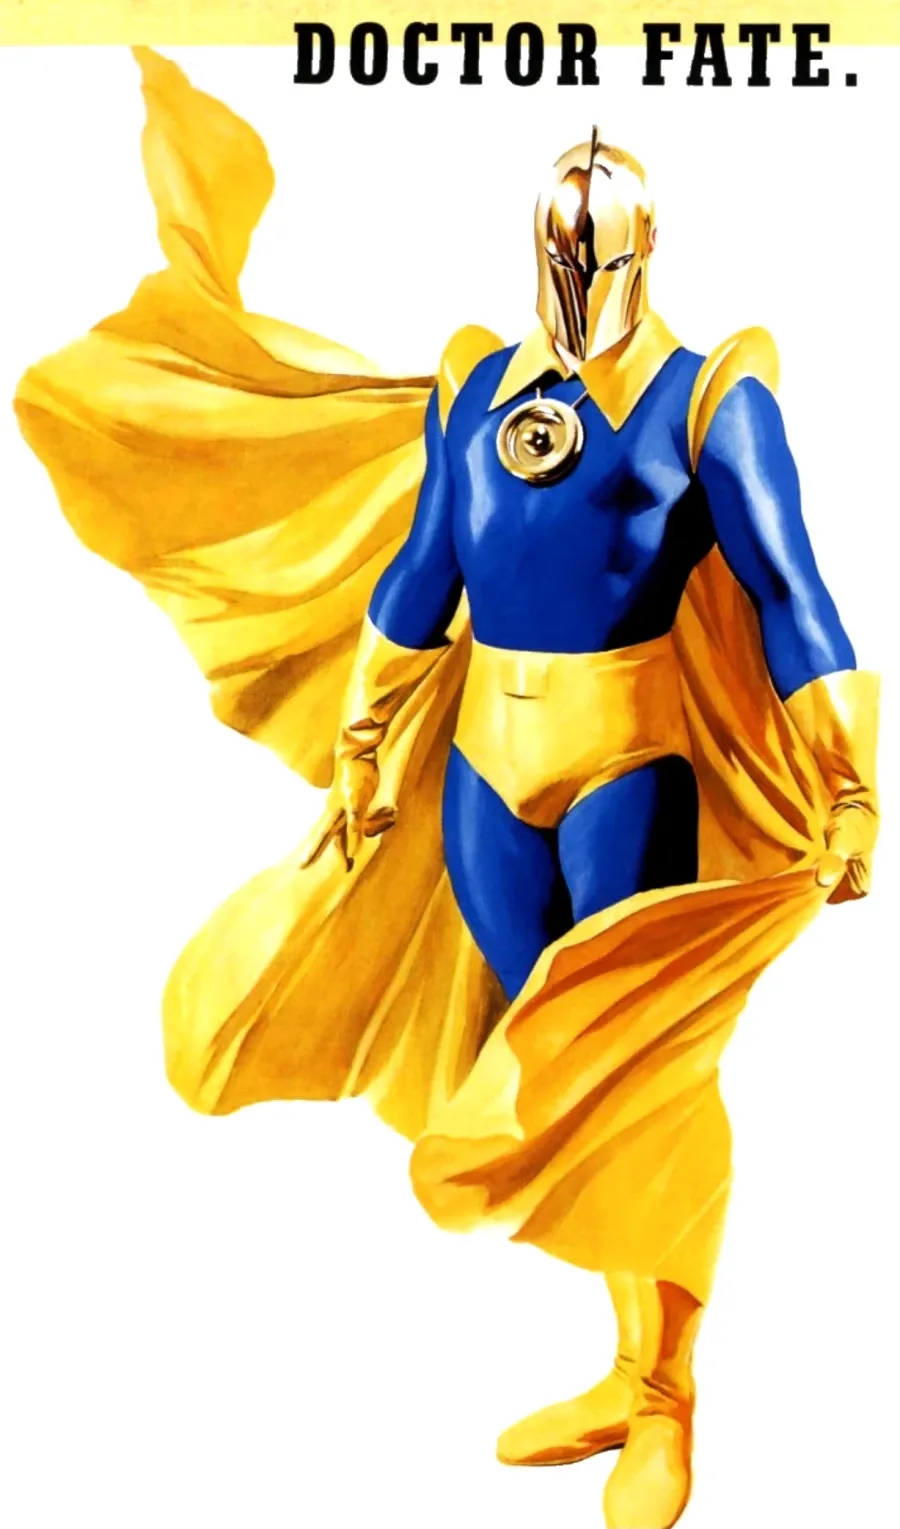 Doctor Fate, as drawn by Alex Ross